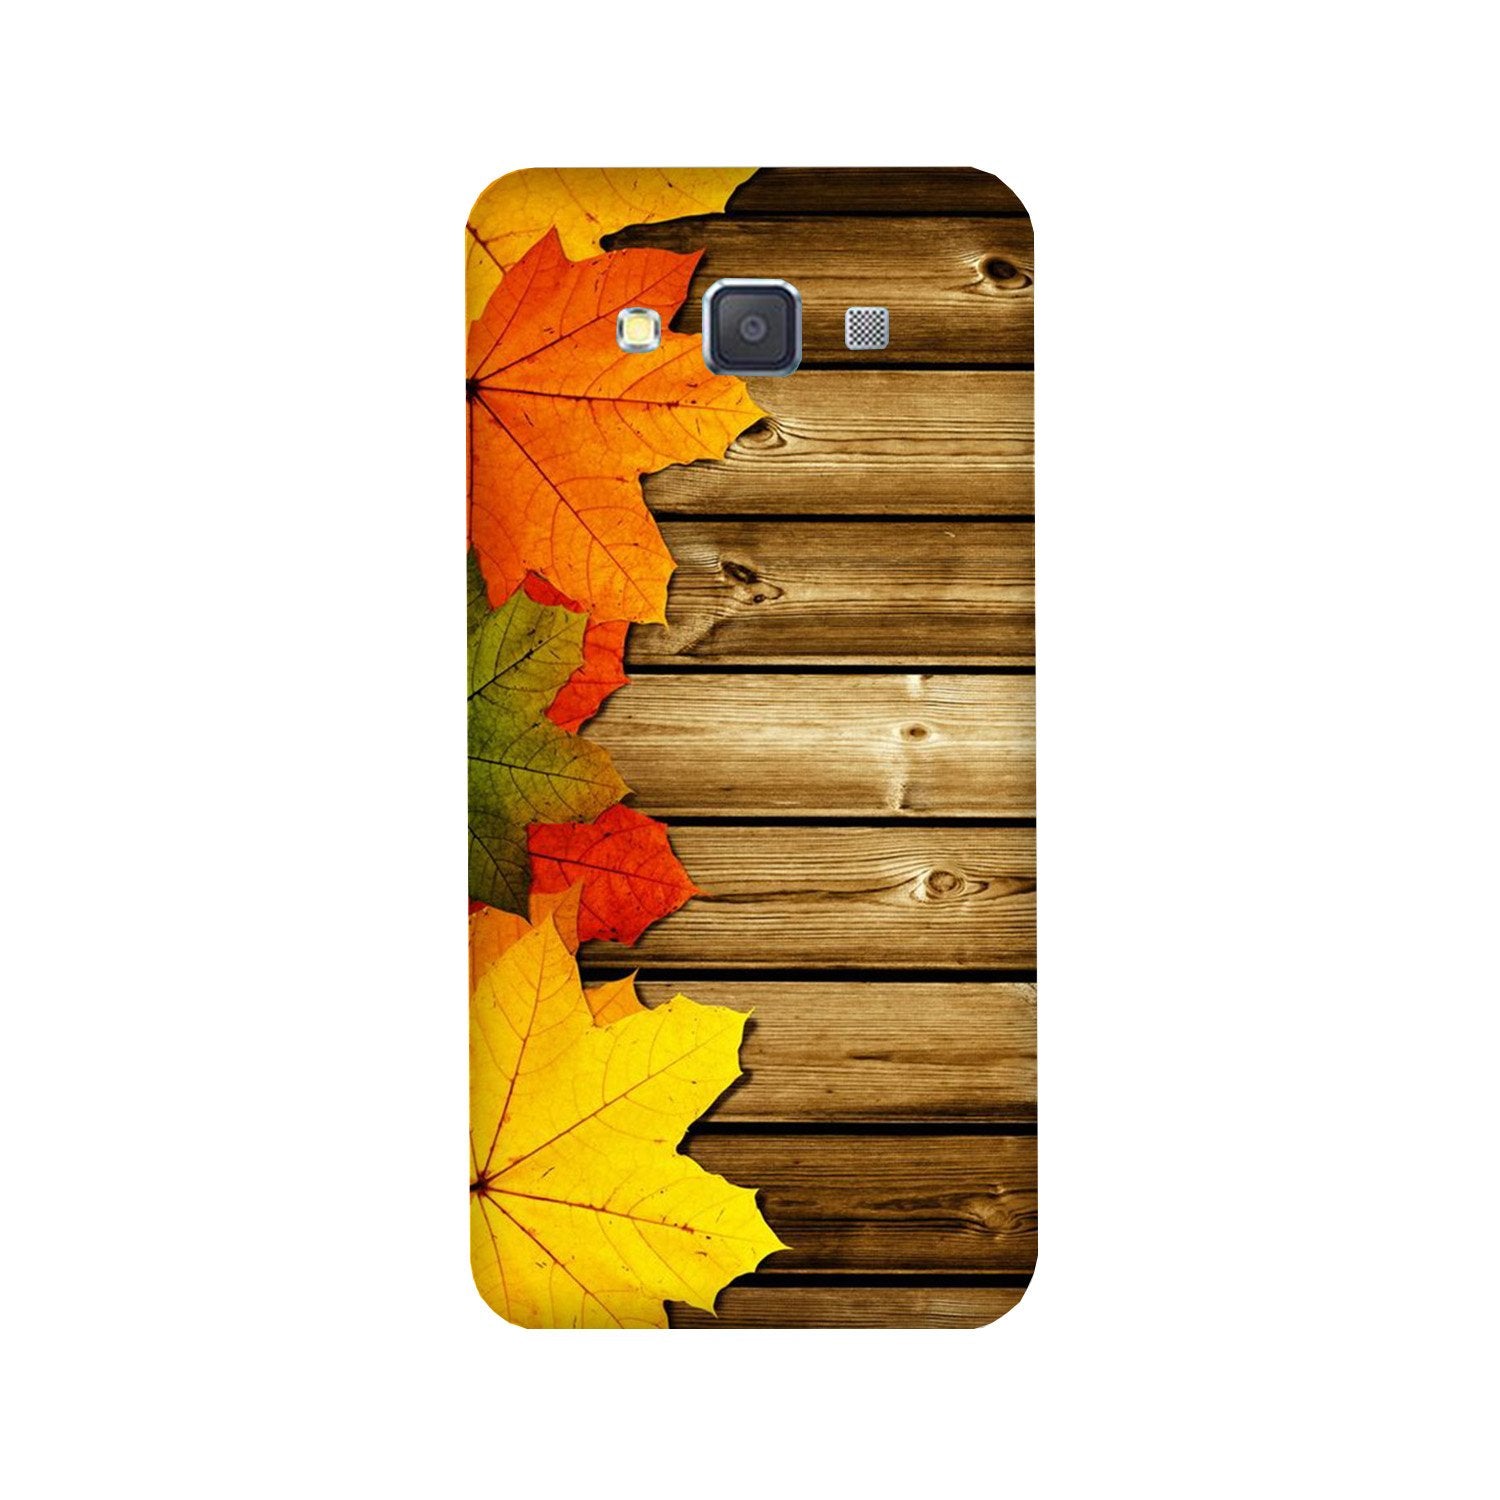 Wooden look3 Case for Galaxy A5 (2015)